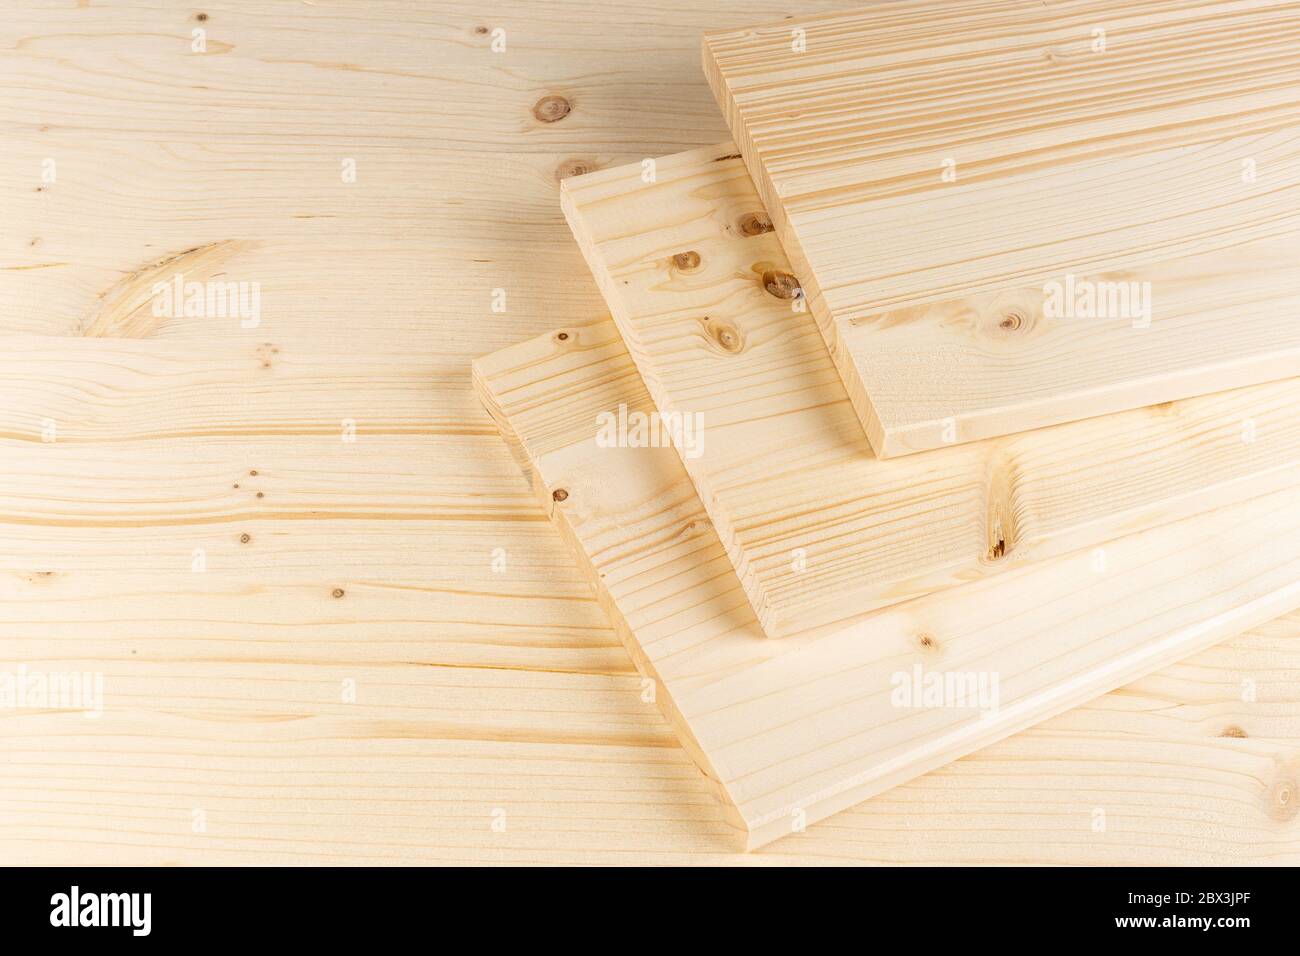 stack of spruce wood construction planks or boards on wooden background. Natural material carpentry diy industry furniture making concept. Stock Photo